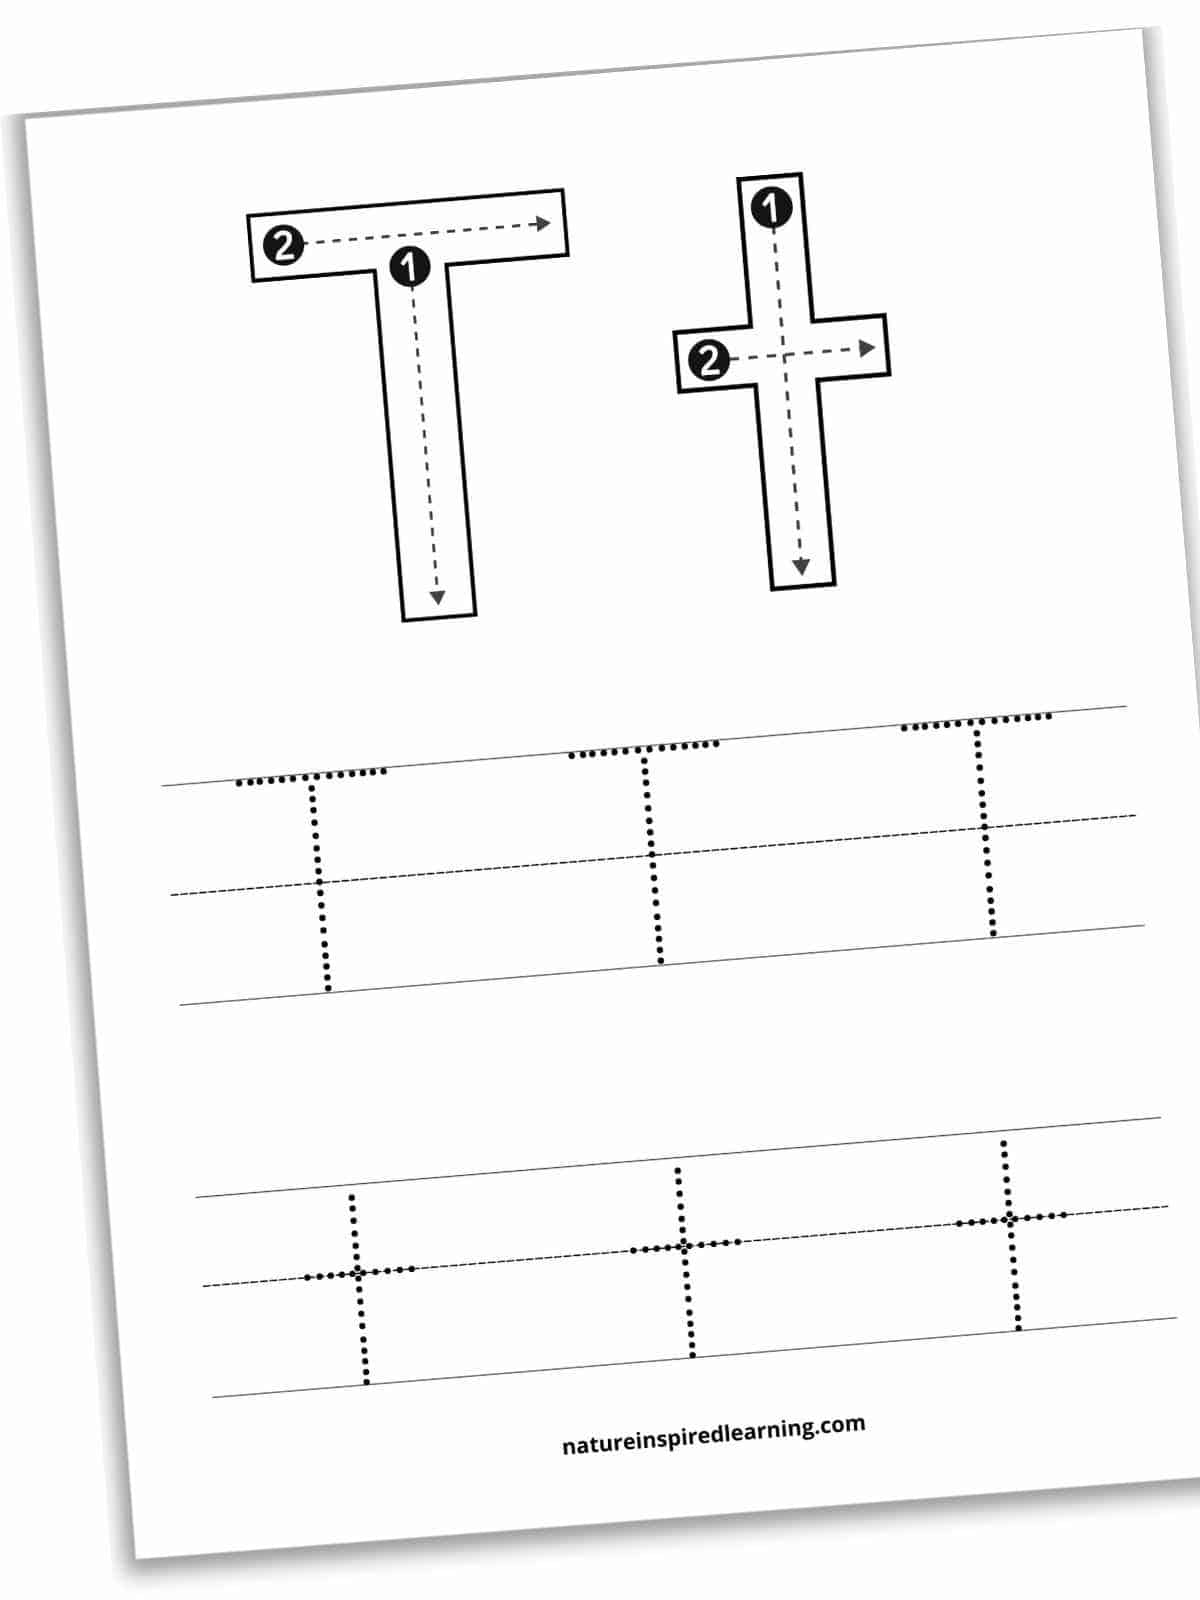 worksheet with large outlines of T and t with lines, numbers and arrows inside. Two sets of lines below with dotted T's and t's